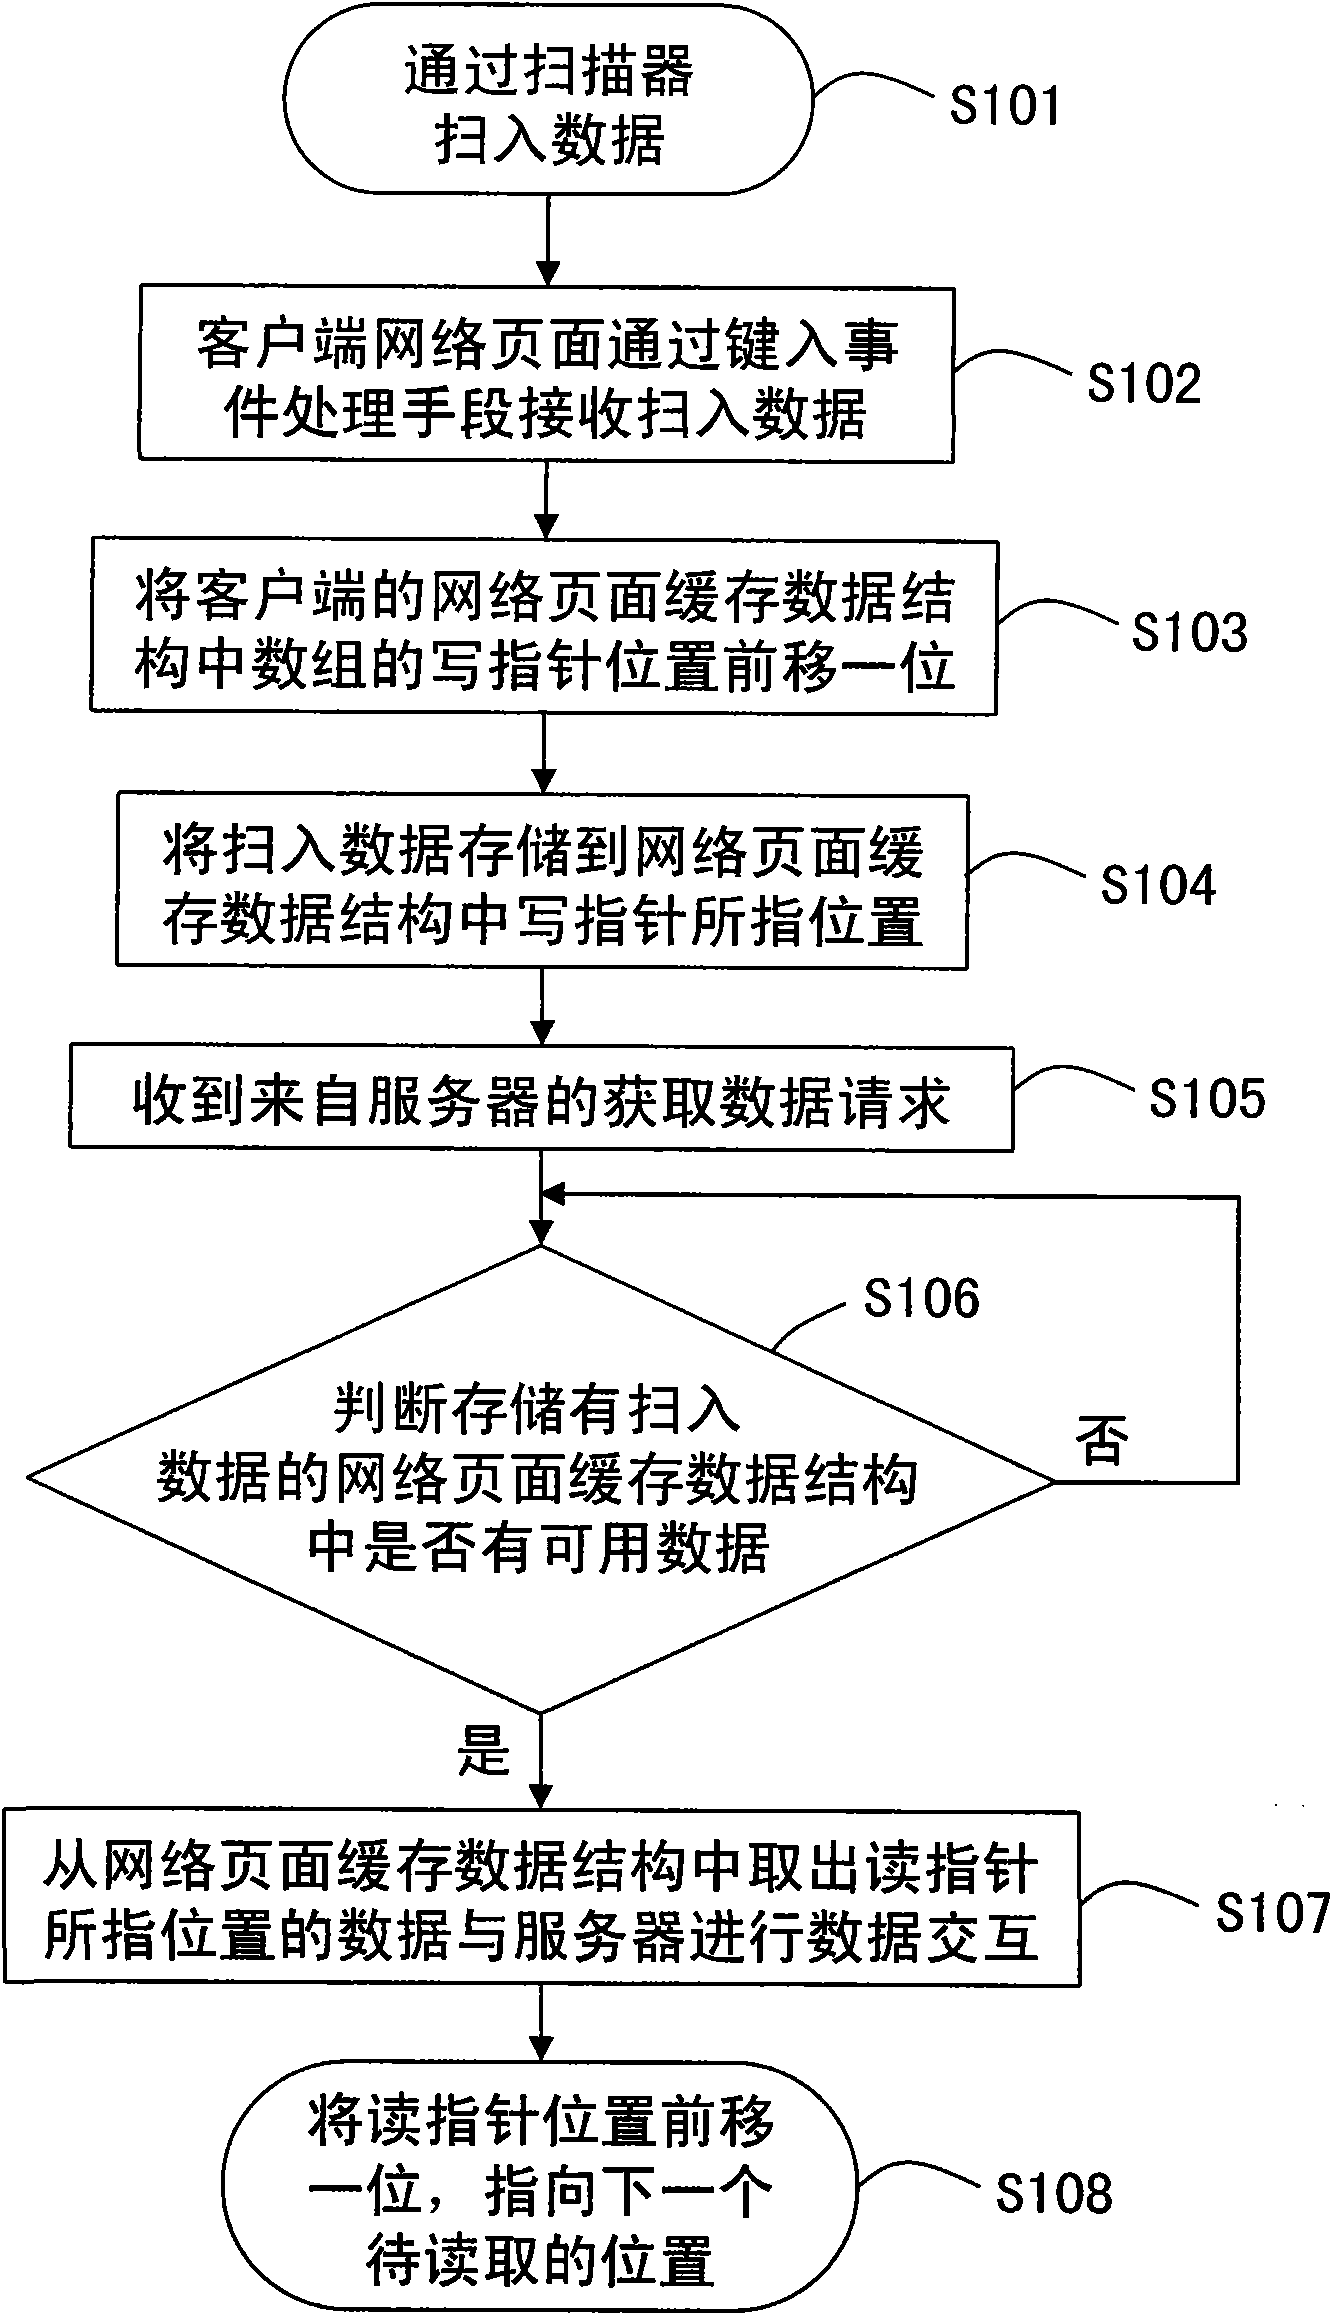 Data scanning and inputting method